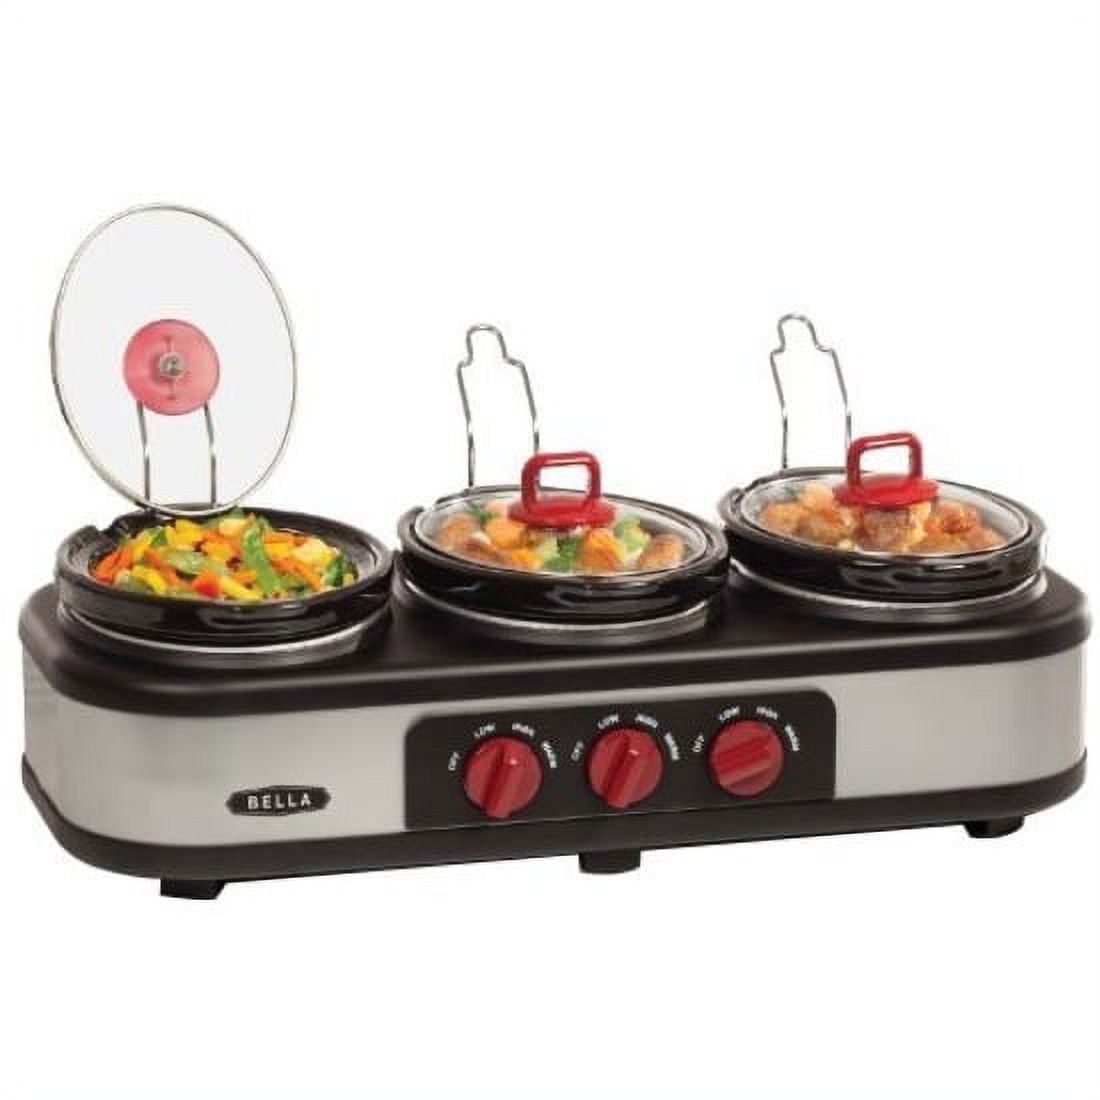 BELLA CUCINA 3 1.5 QUART TRIPLE SLOW COOKER PARTY EVENT BUFFET SERVING  STERNO